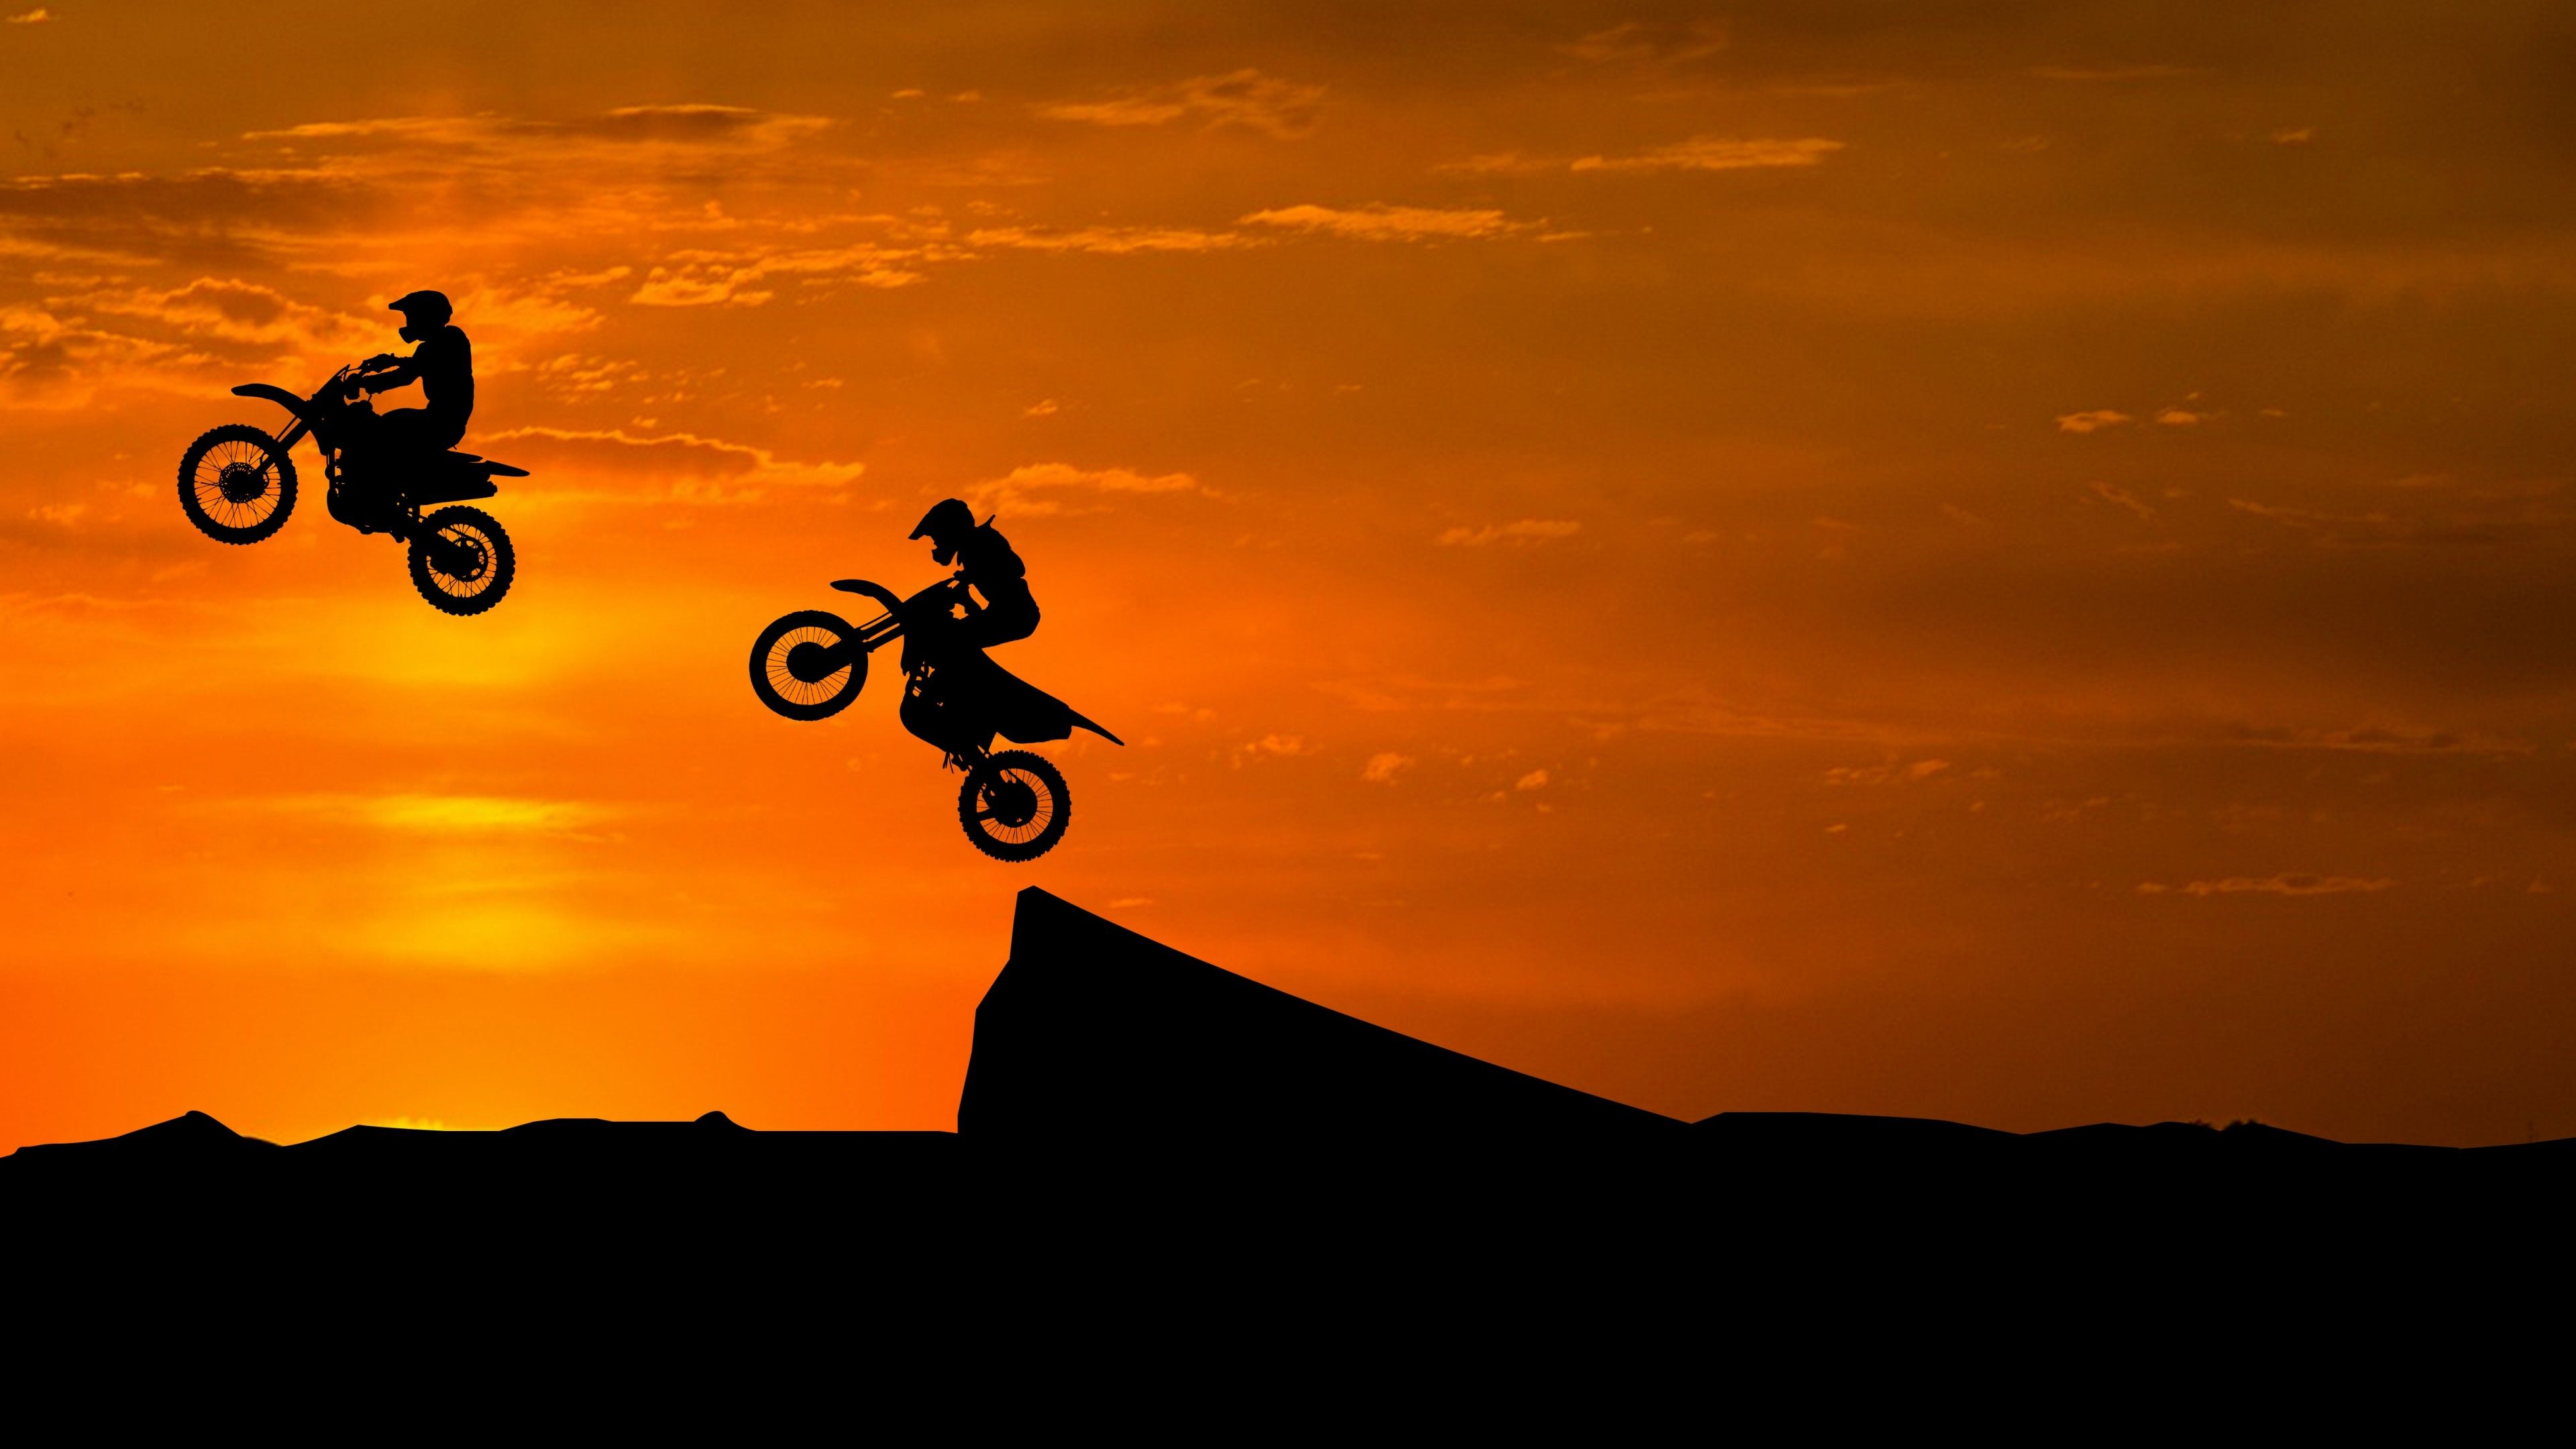 download the new version for ios Sunset Bike Racing - Motocross